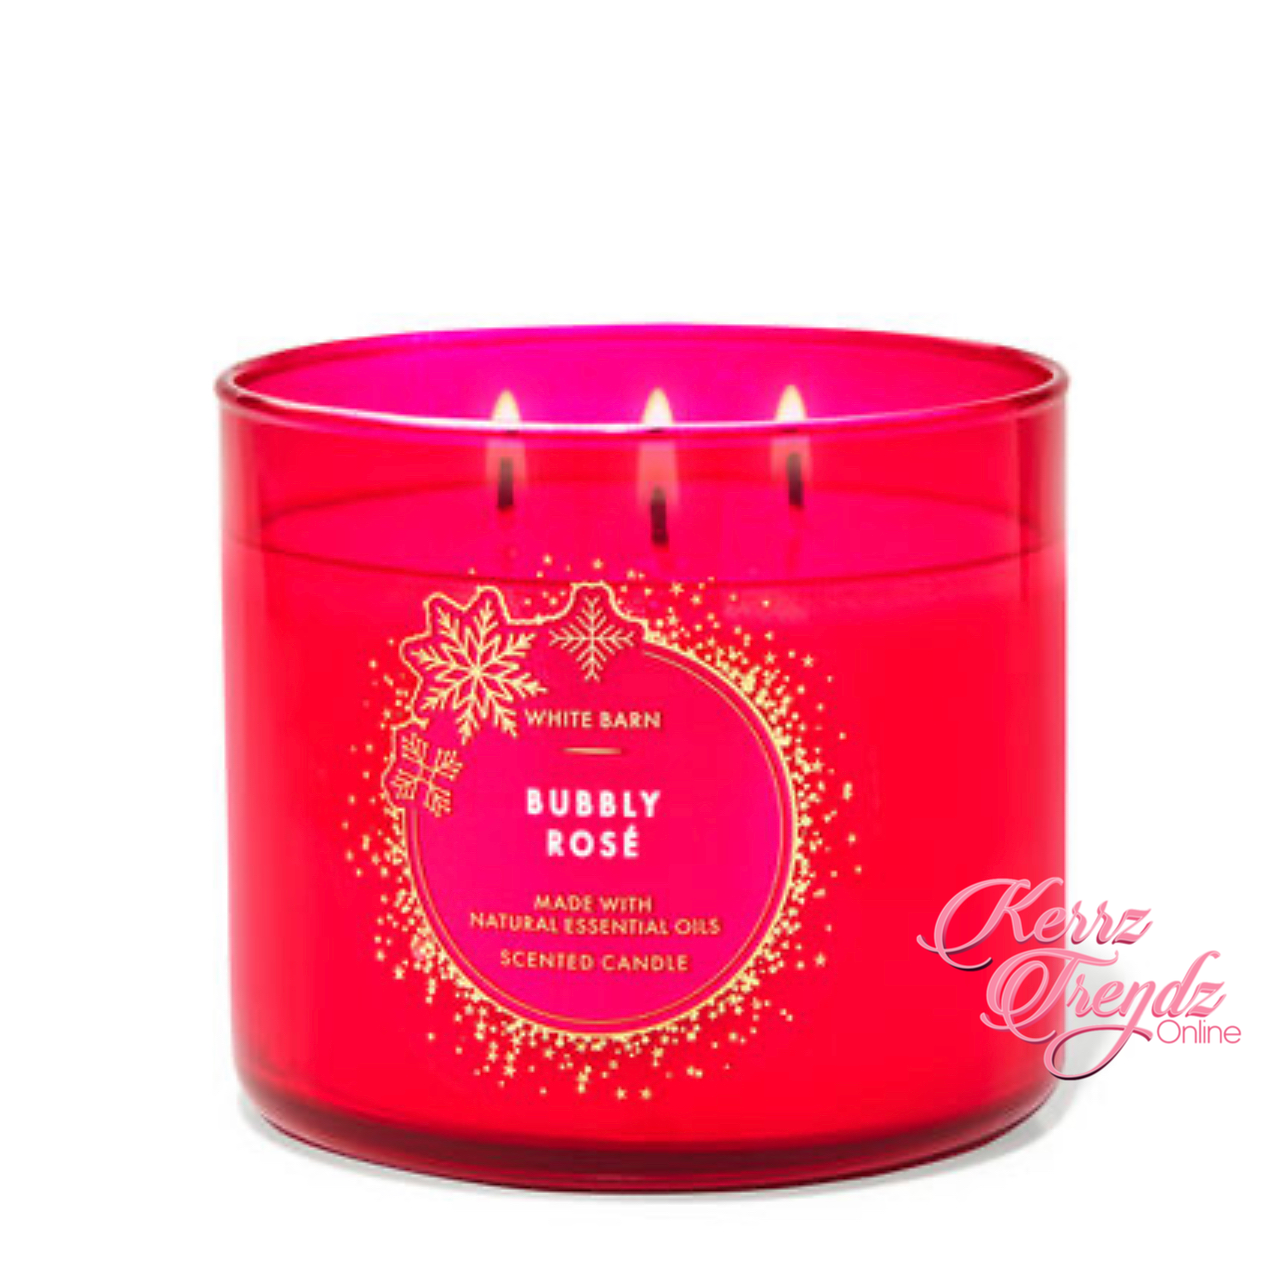 Bubbly Rosé 3-Wick Candle